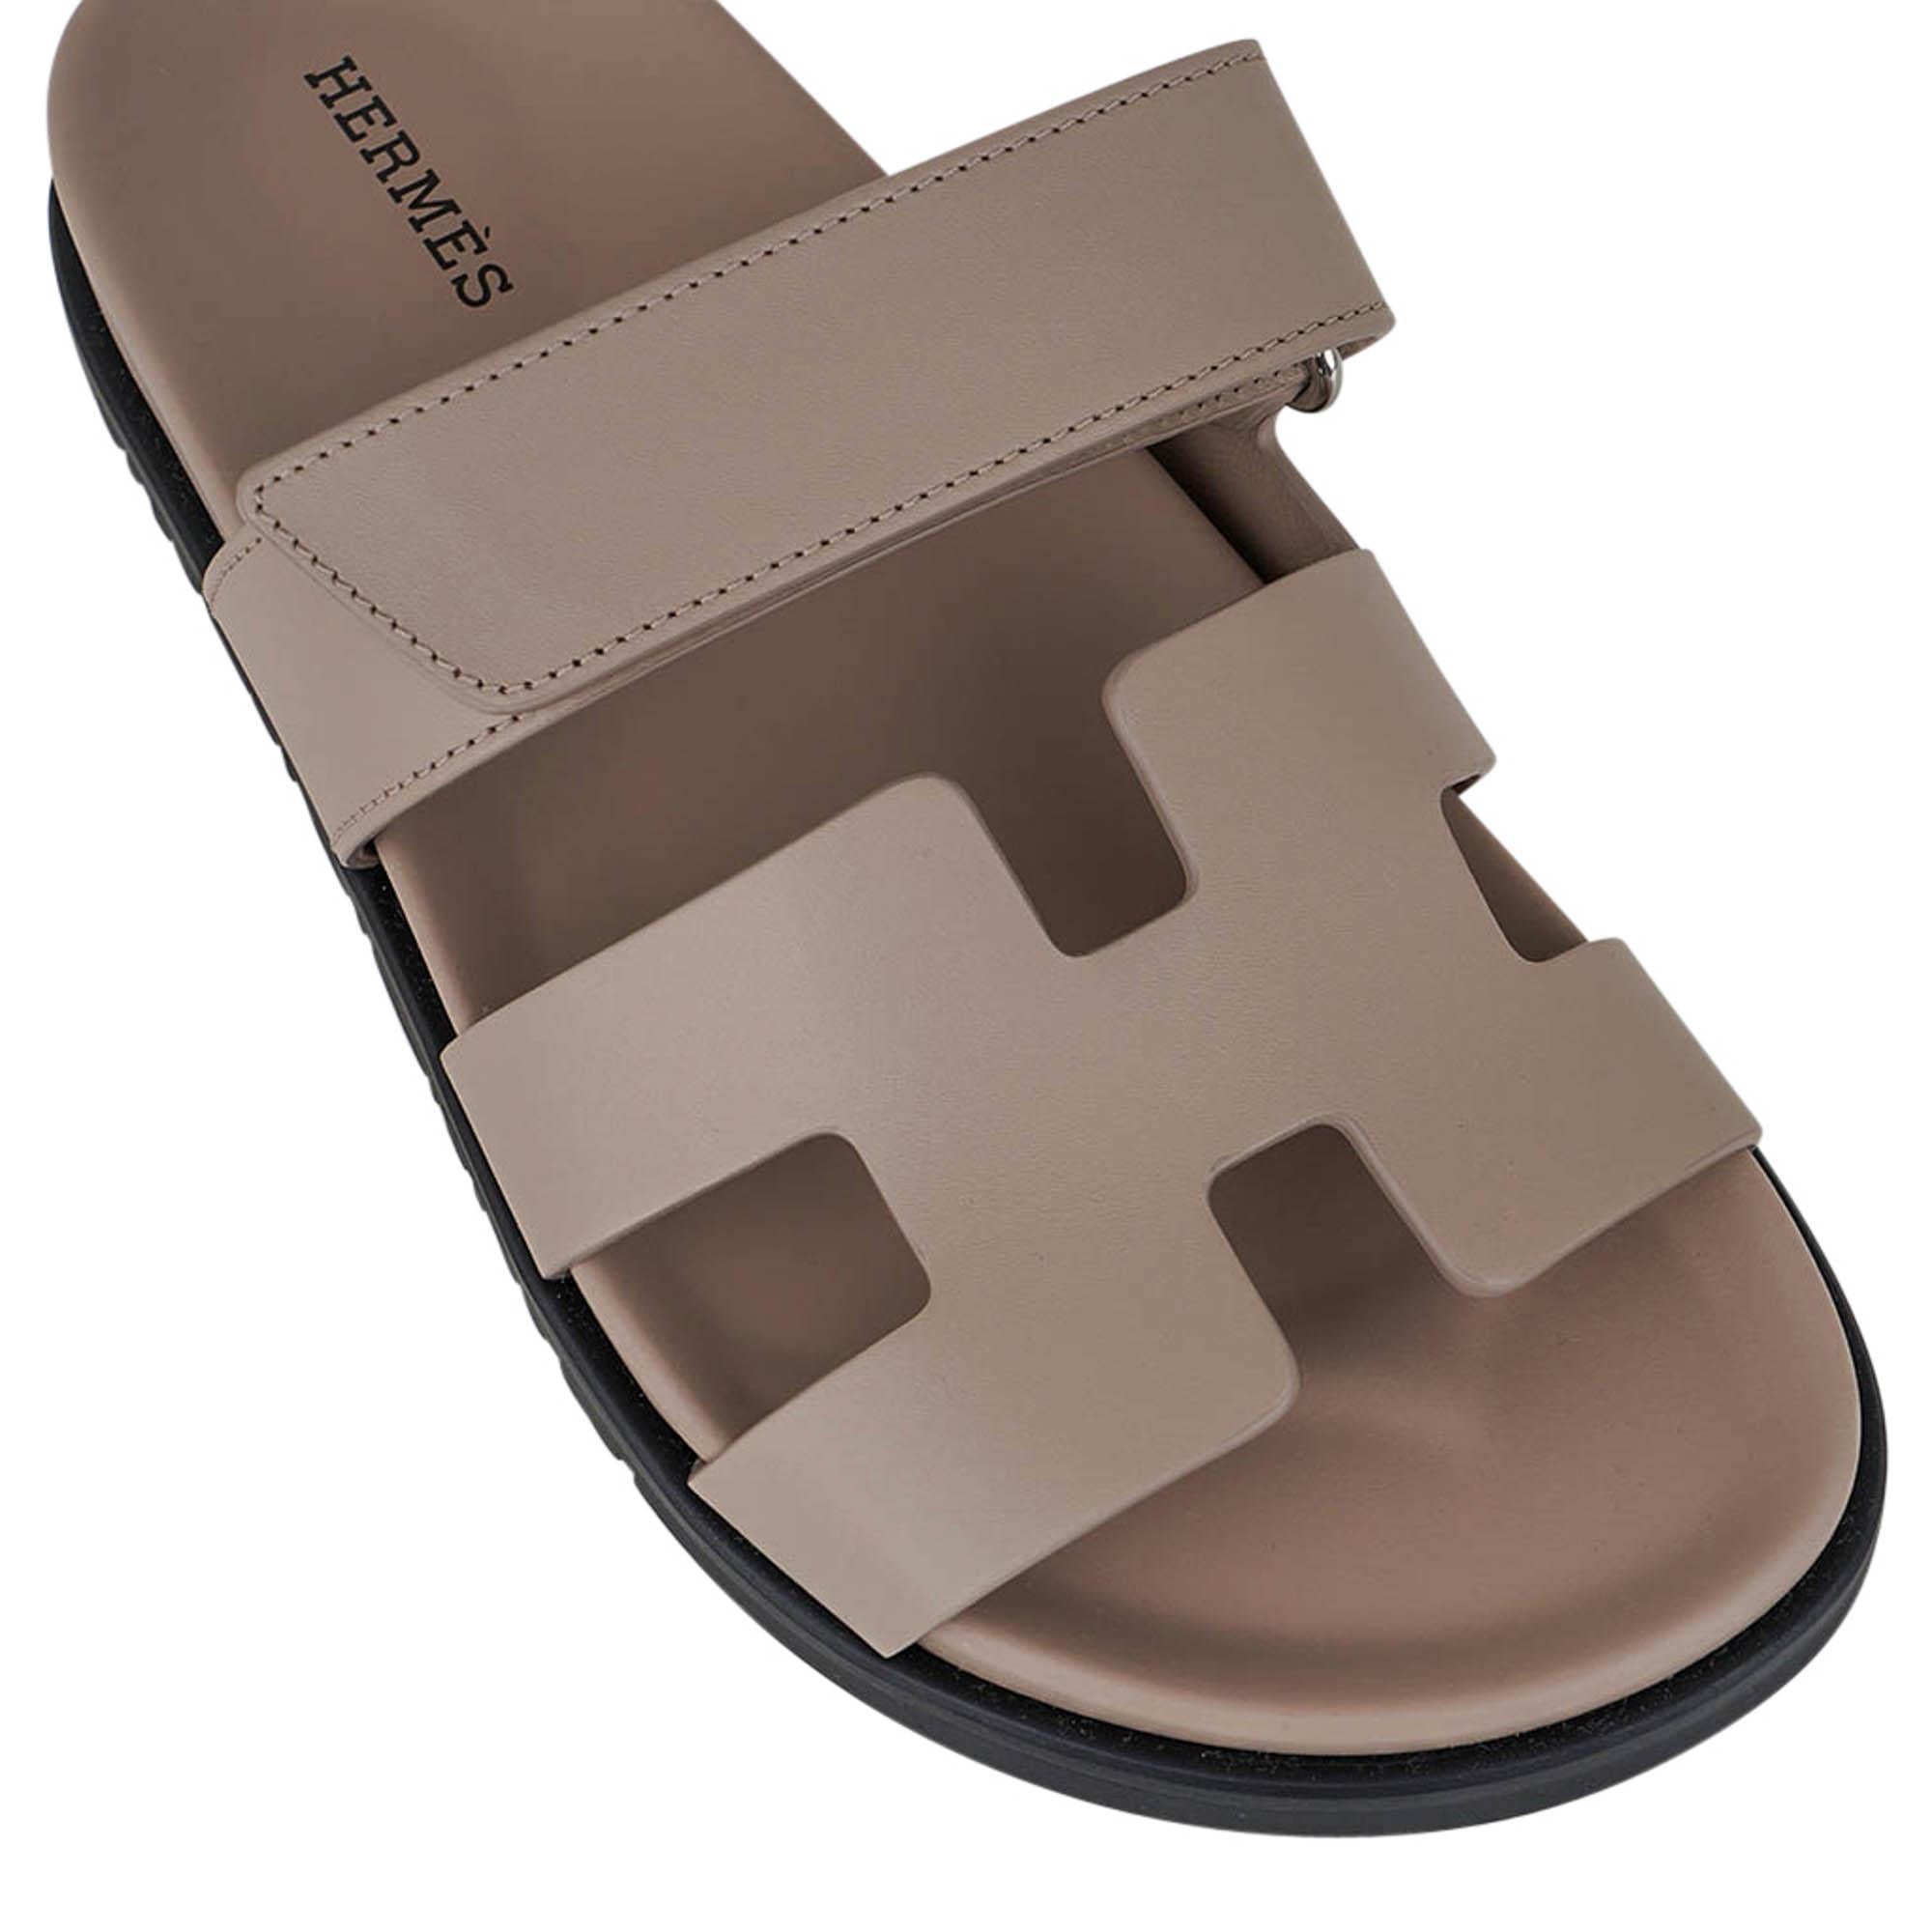 Mightychic offers a pair of limited edition Mastic Hermes Chypre sandals.
A warm nude for neutral perfection.
Calfskin with black anatomical insole and H embossed Black rubber sole.
Strap across foot is adjustable with velcro closure.
Comes with